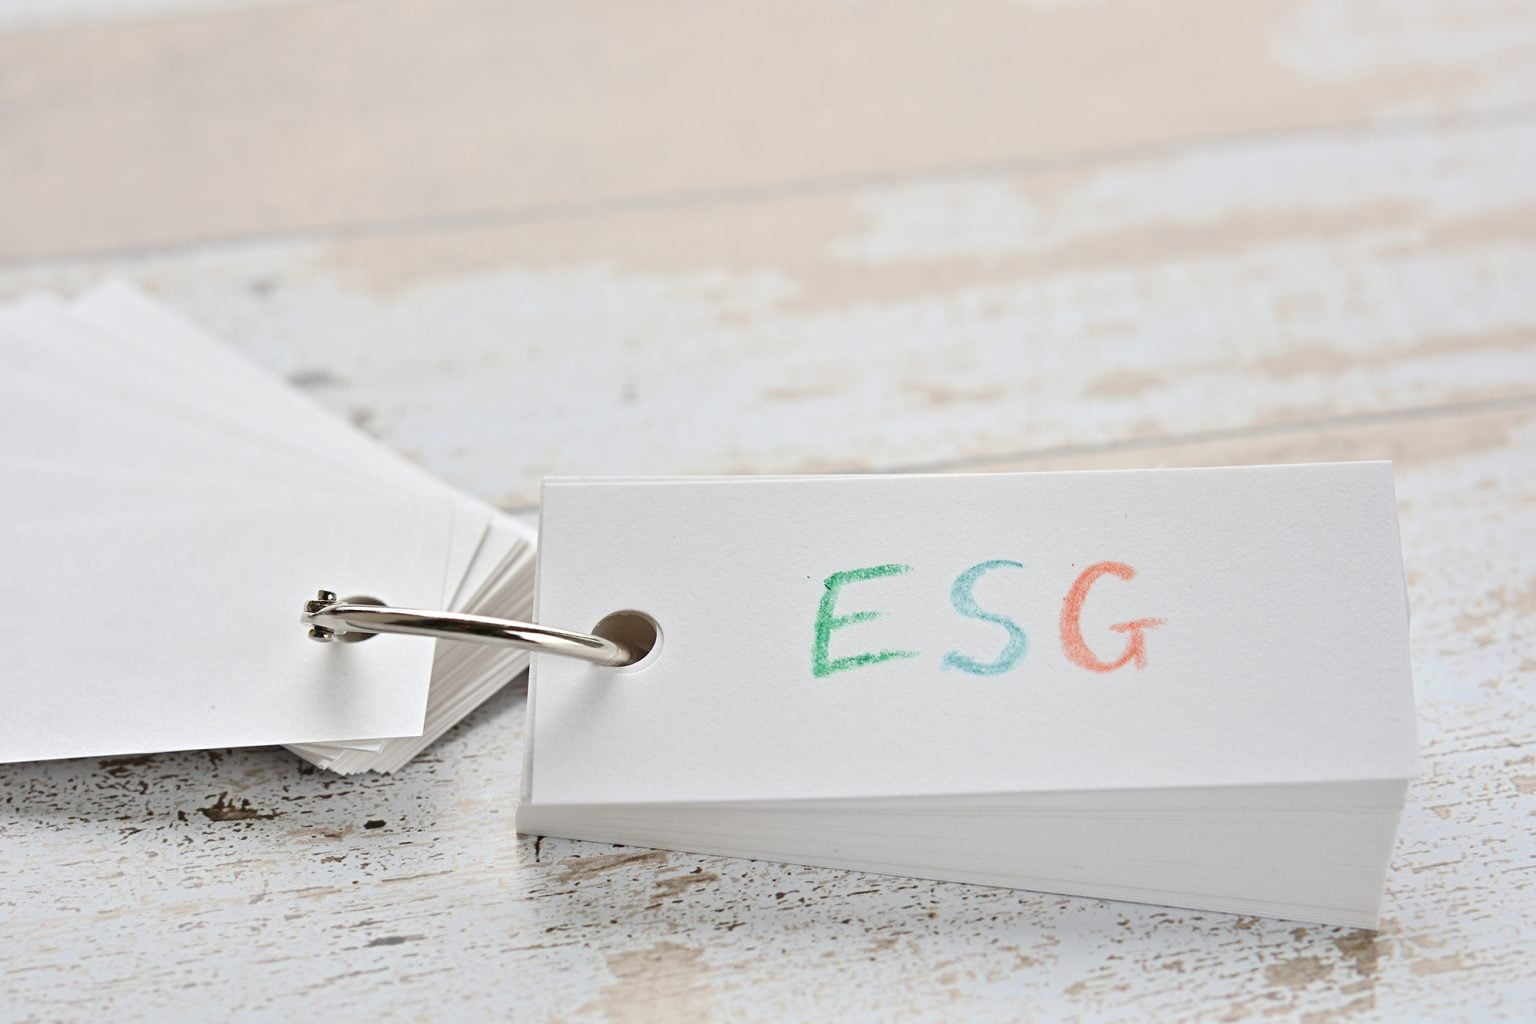 The words “ESG” written in a word book. Close-up. It is an acron